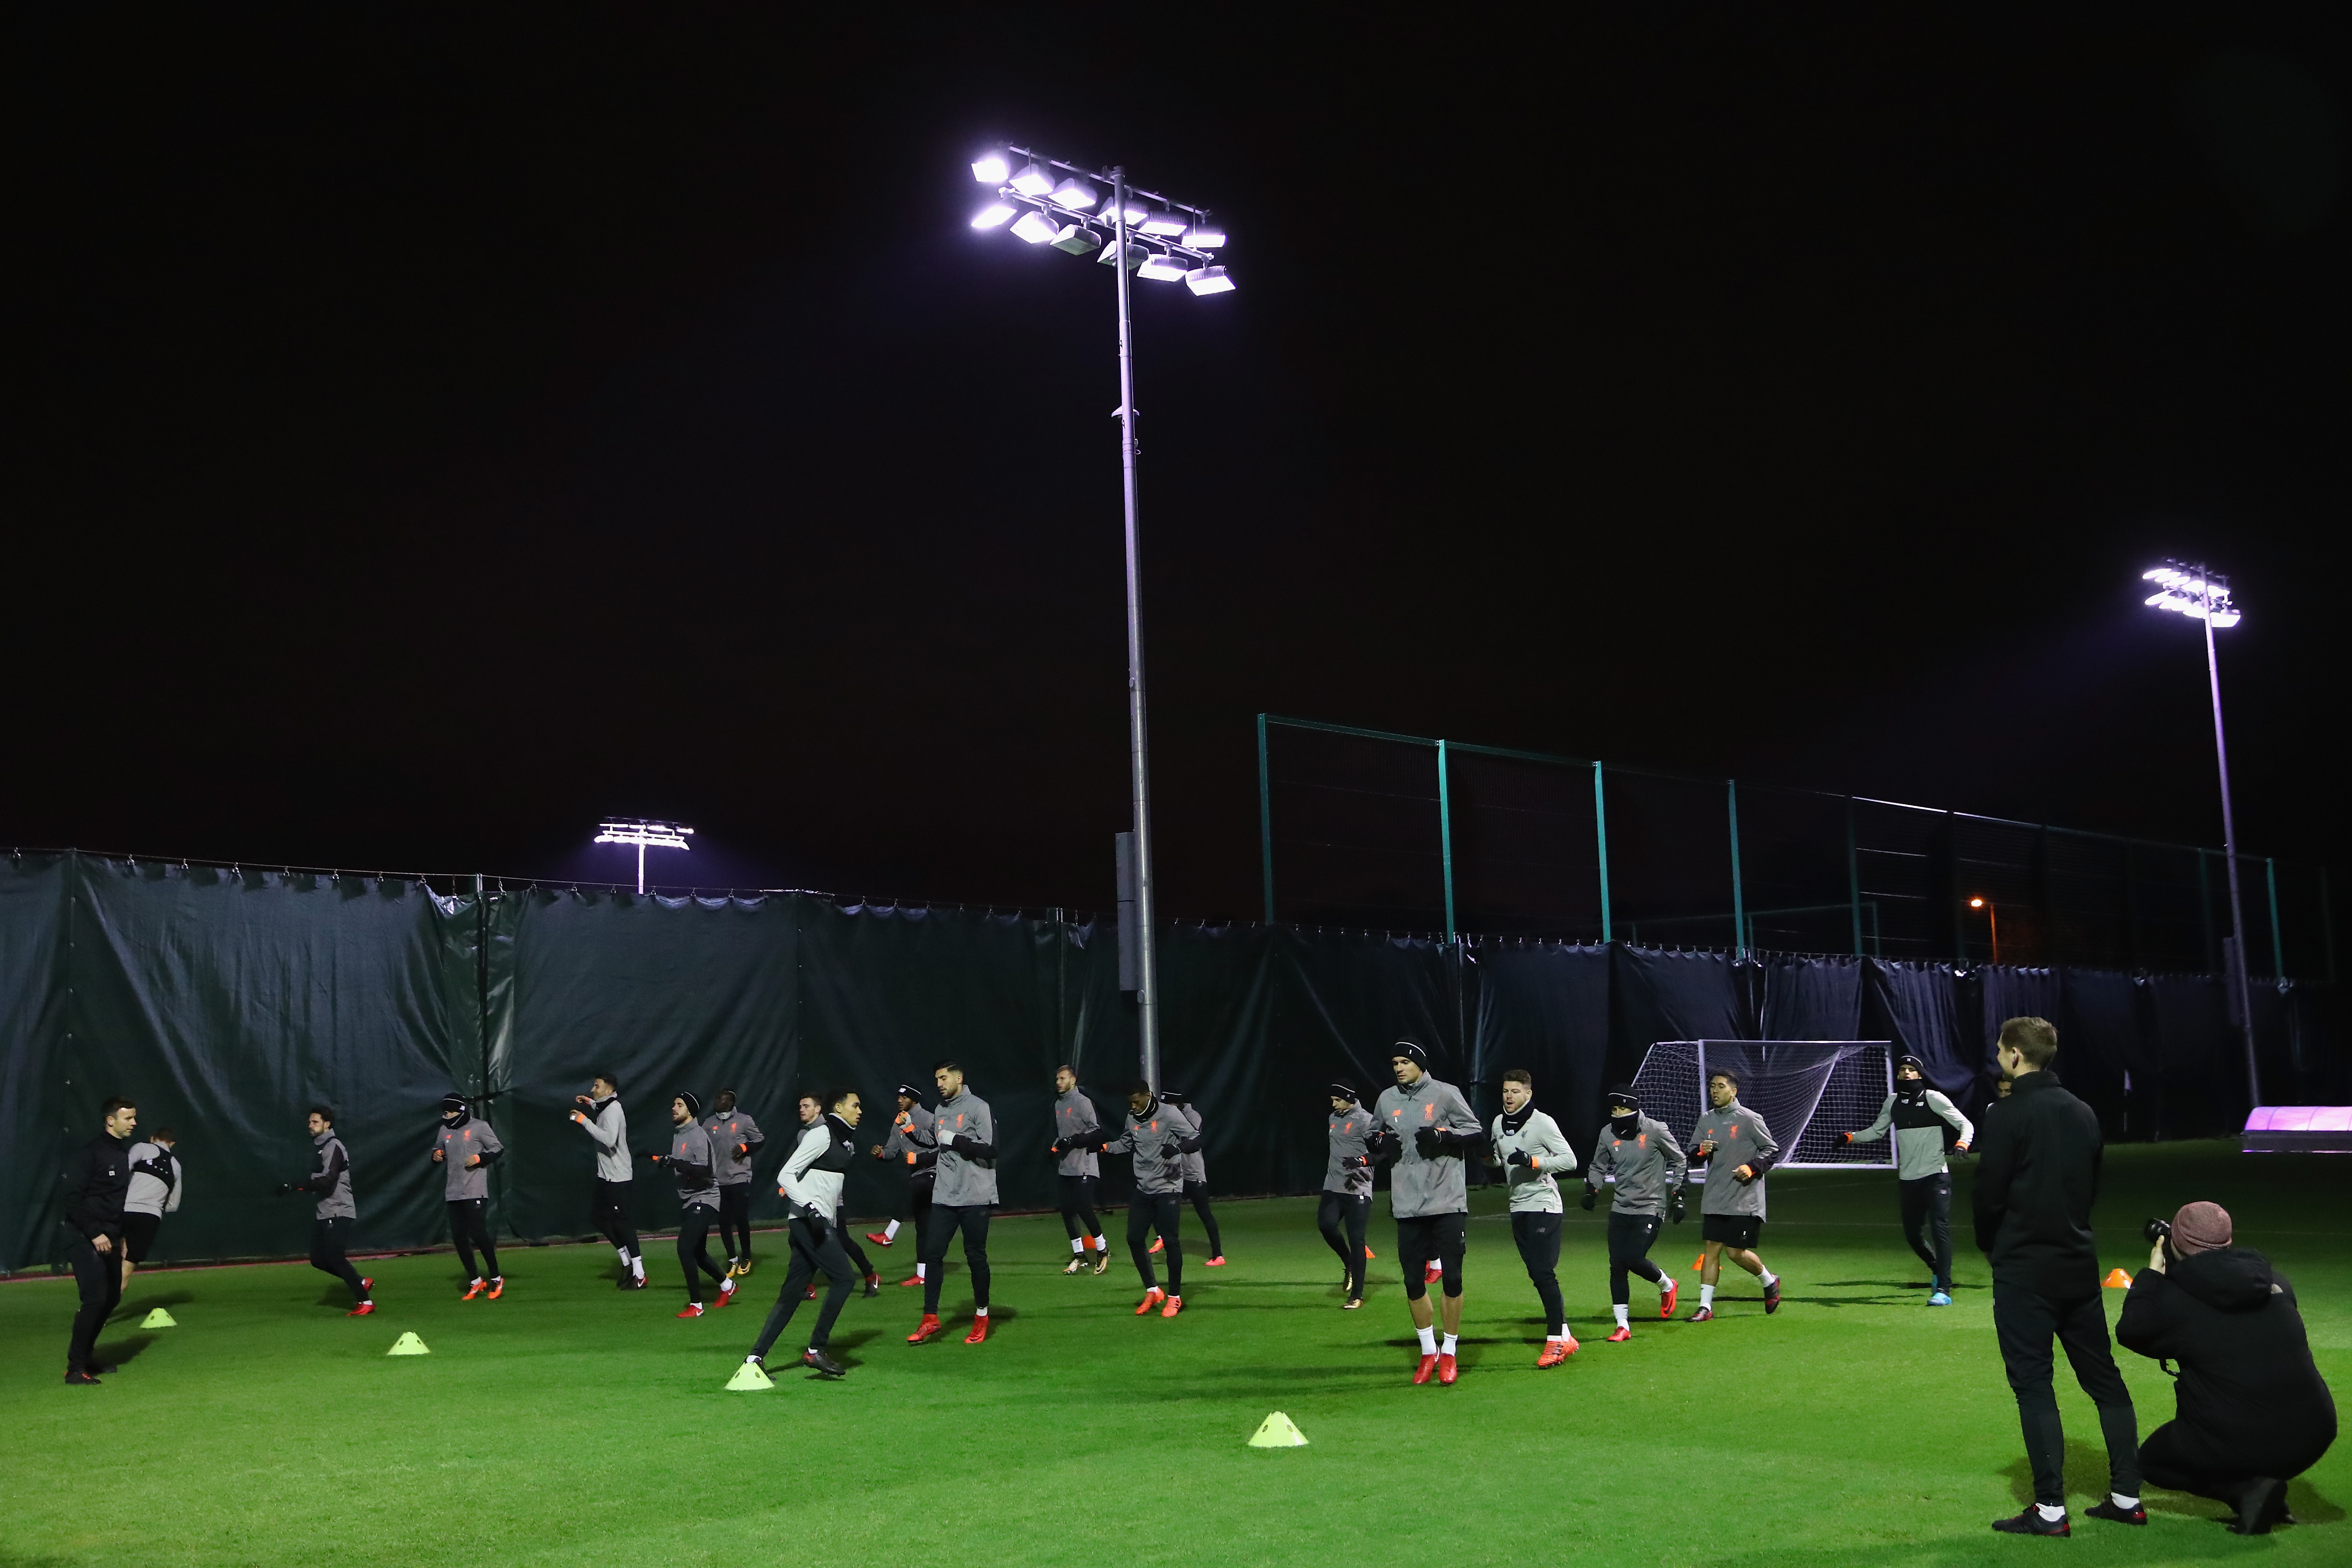 LIVERPOOL, ENGLAND - DECEMBER 05: Players of Liverpool warm up prior to a Liverpool FC training session at Melwood Training Ground on December 5, 2017 in Liverpool, England.  (Photo by Clive Brunskill/Getty Images)